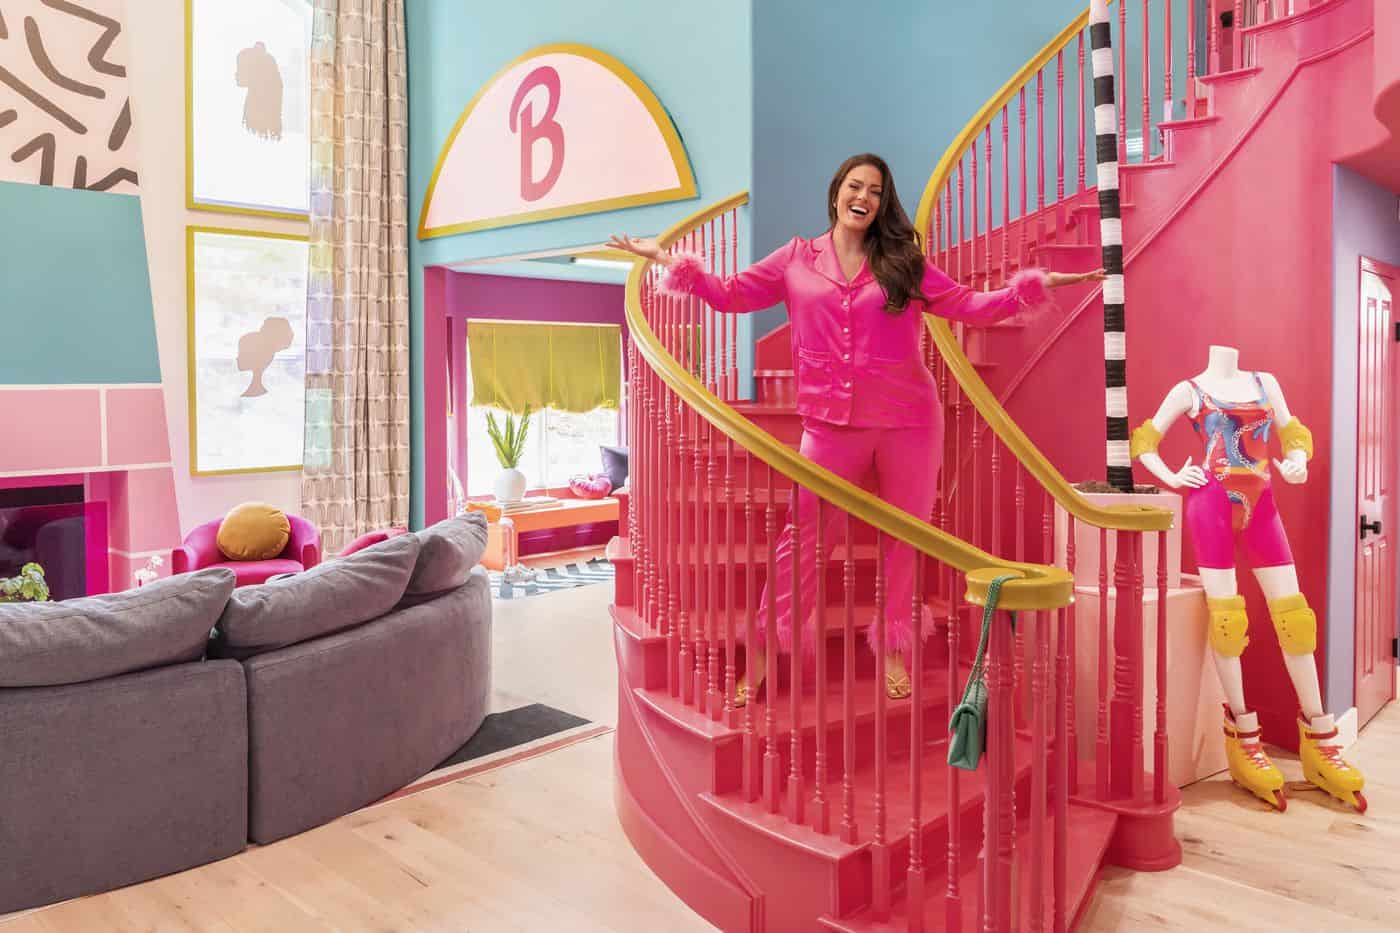 A woman in pink stands inside a life-size Barbie Dreamhouse in this image from Mattel Television.